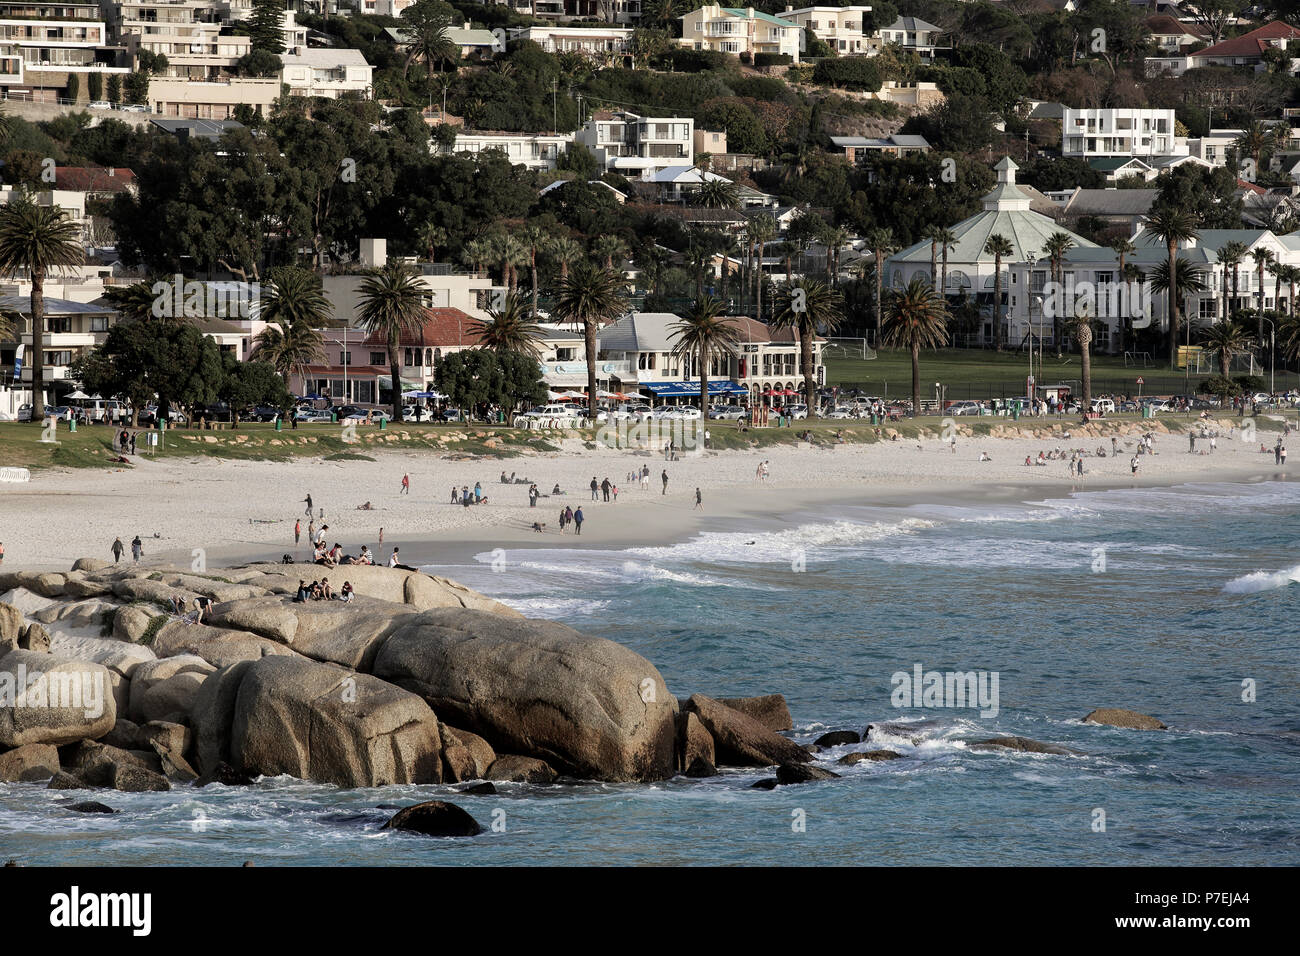 People enjoy a warm winters day at Camps Bay, Cape Town, South Africa Stock Photo